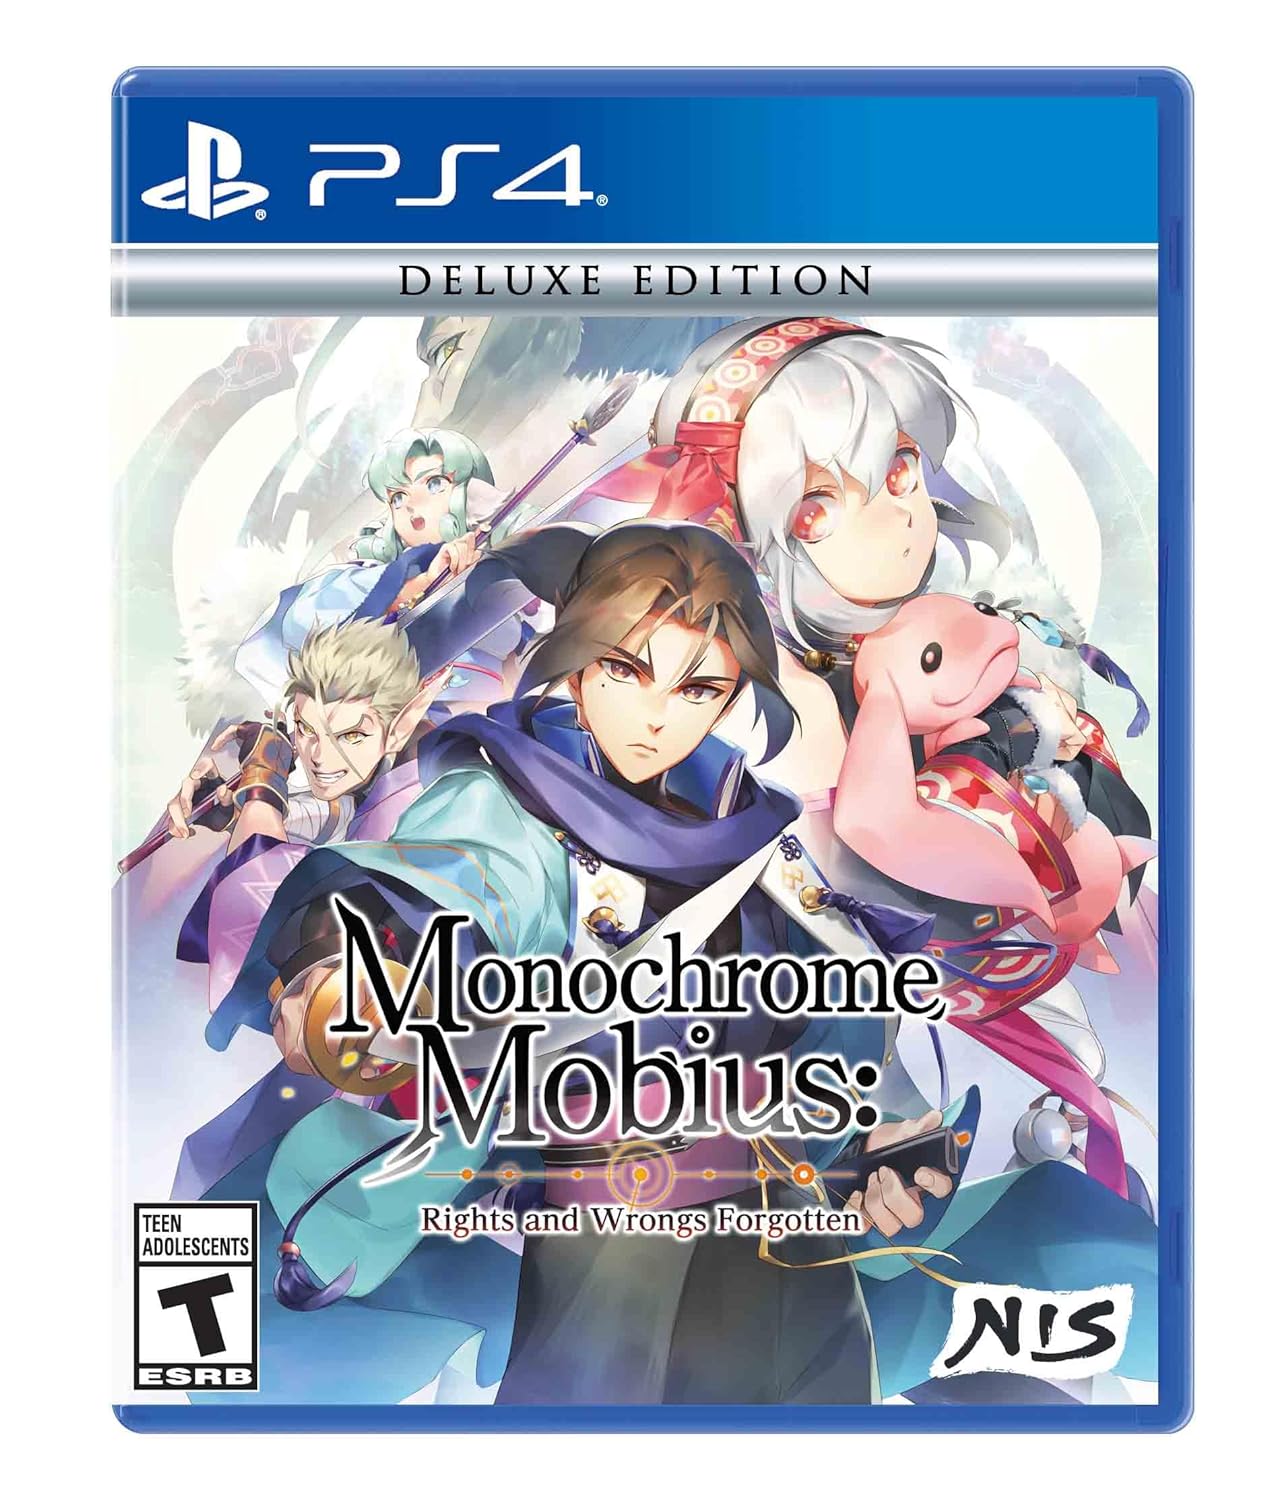 Monochrome Mobius: Rights and Wrongs Forgotten (Deluxe Edition): PS4 $25 + Free Shipping w/ Prime